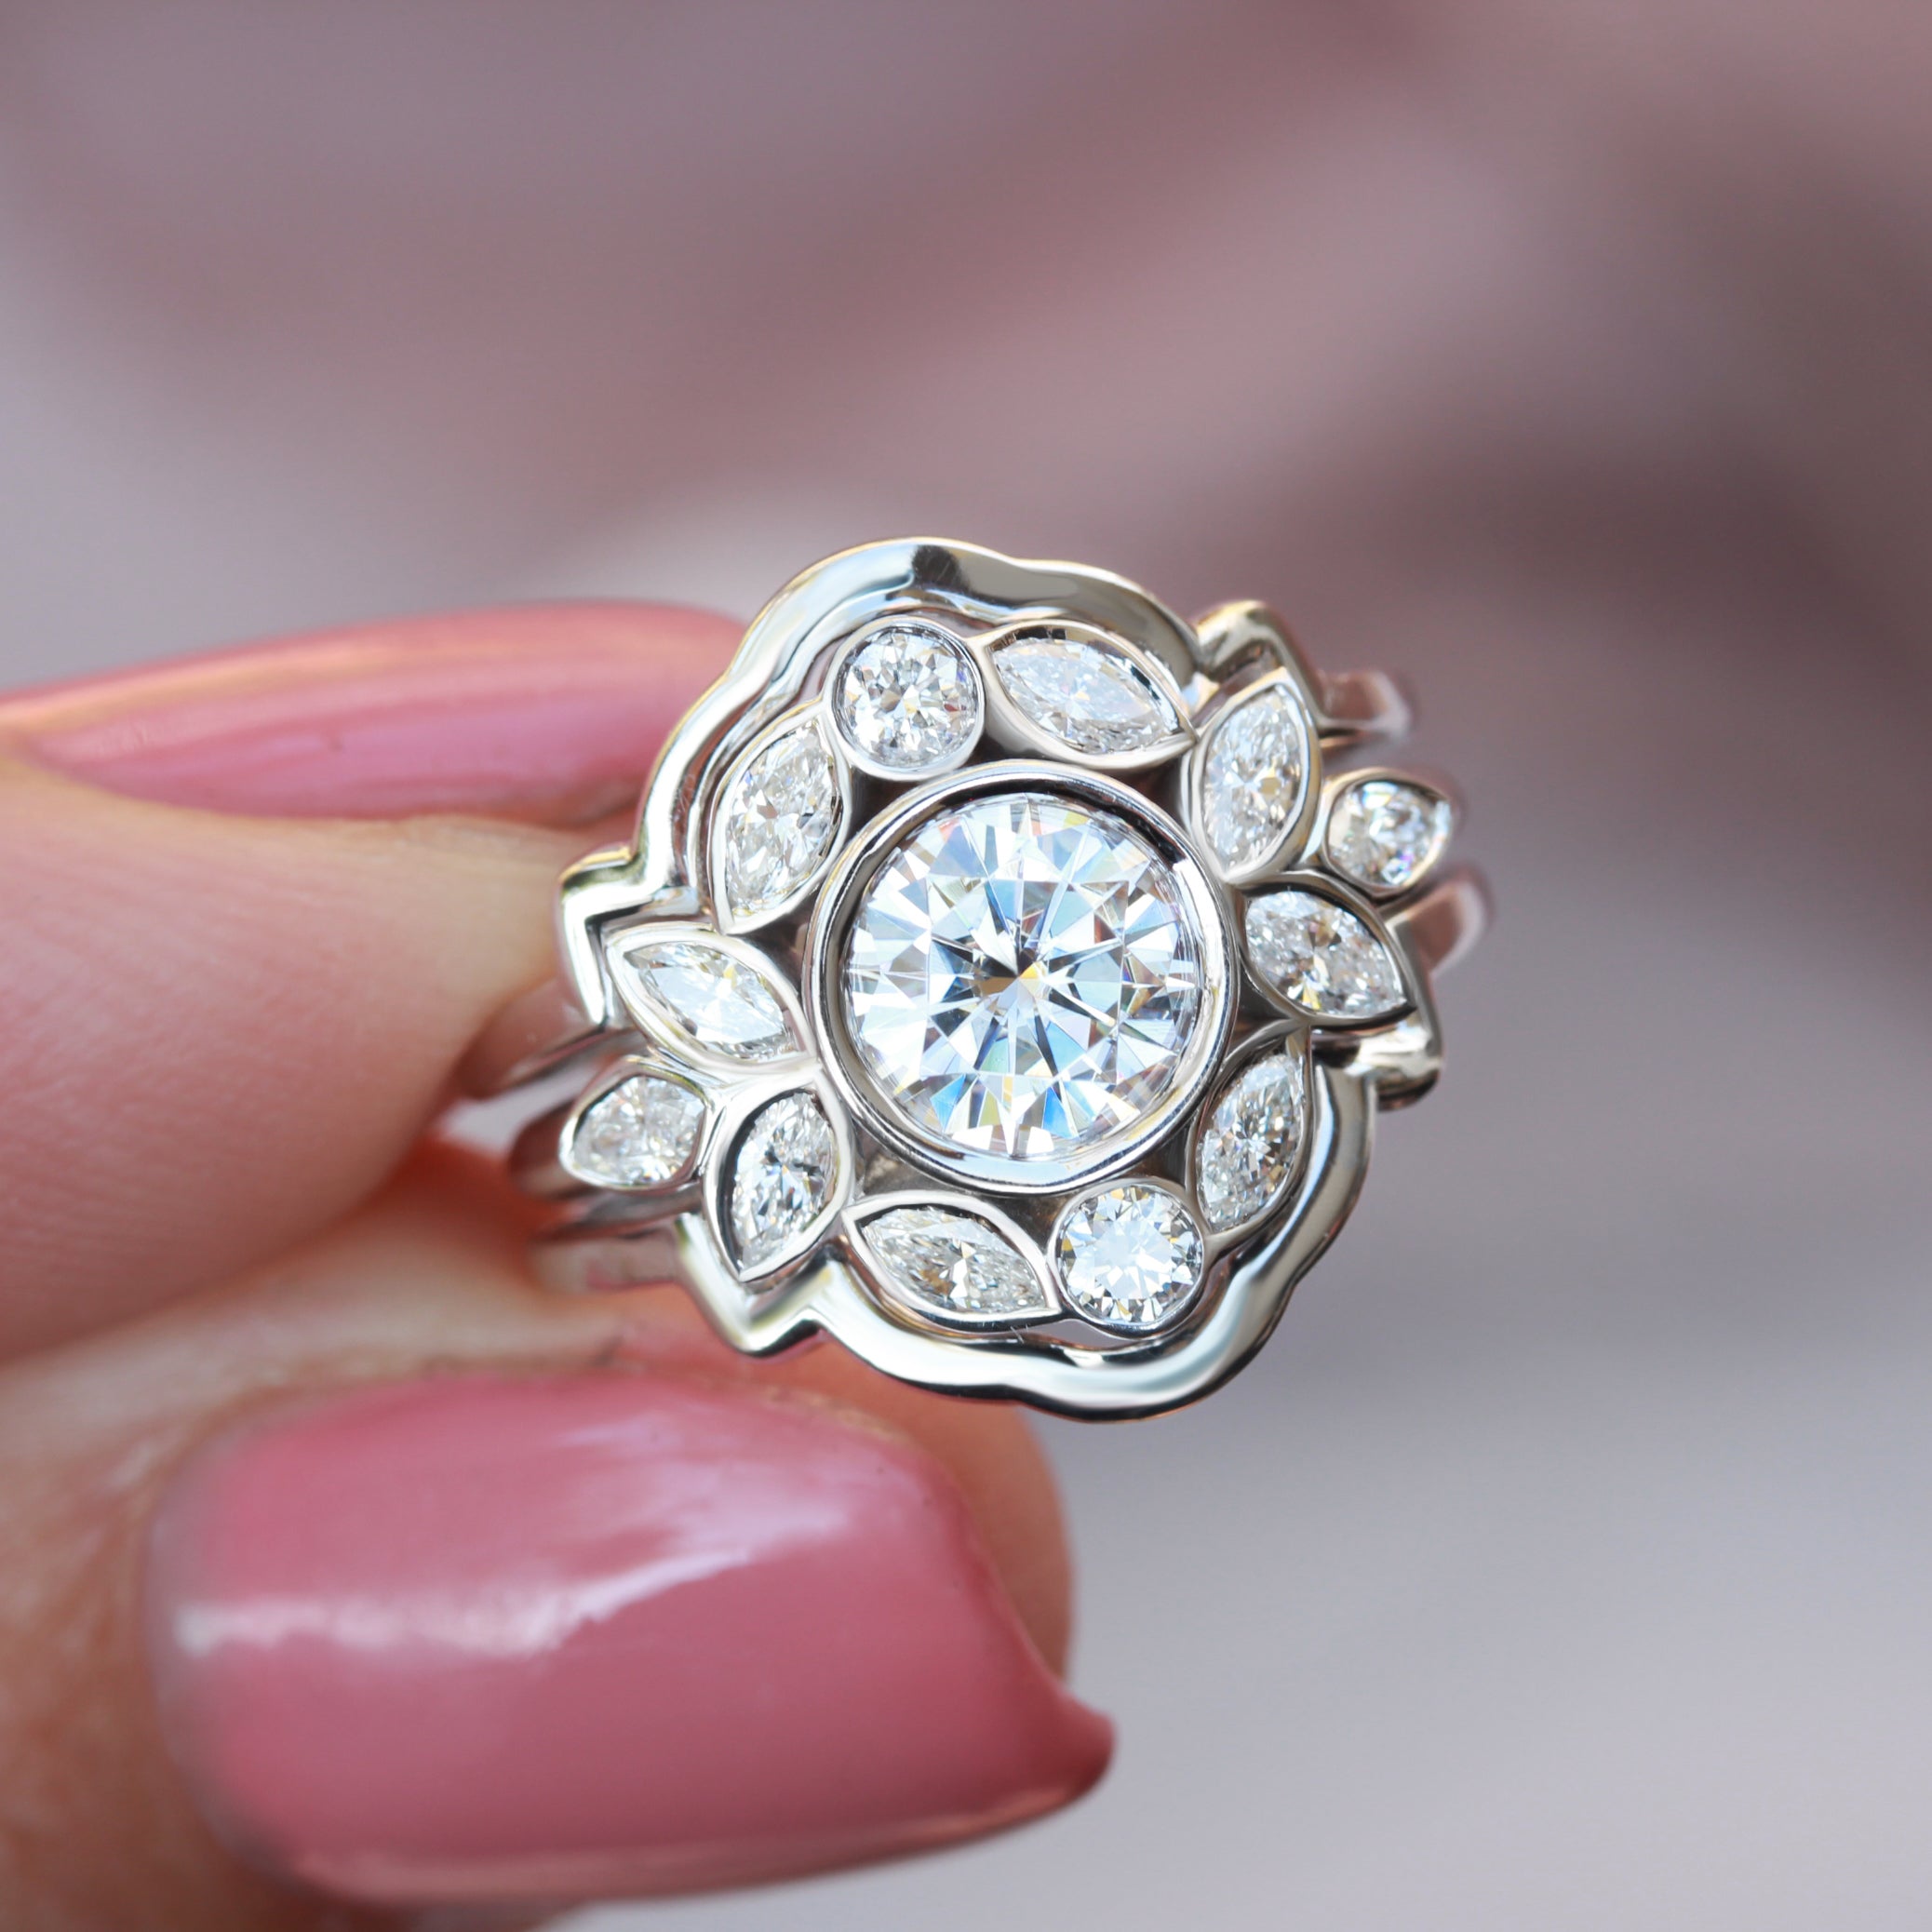 Bezel Diamond Flower Engagement Ring Set with Gold Ring Guard "Lily Emma" ♥